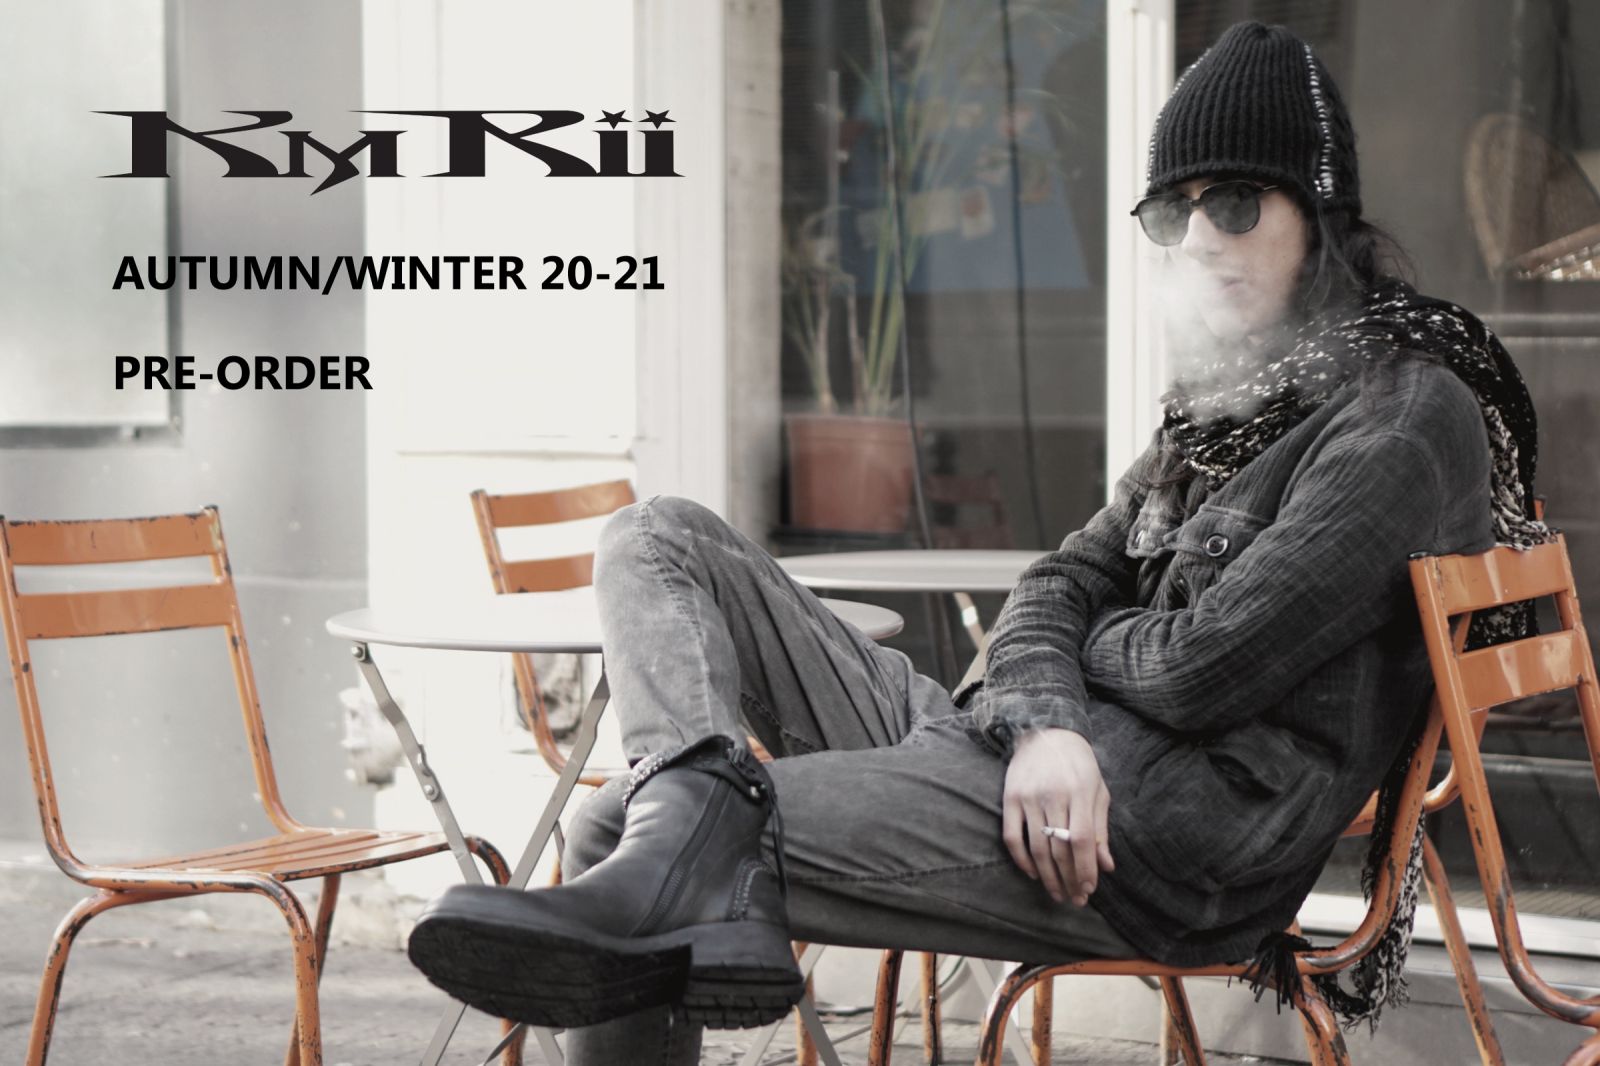 KMRii - 2020 AW | chord online store